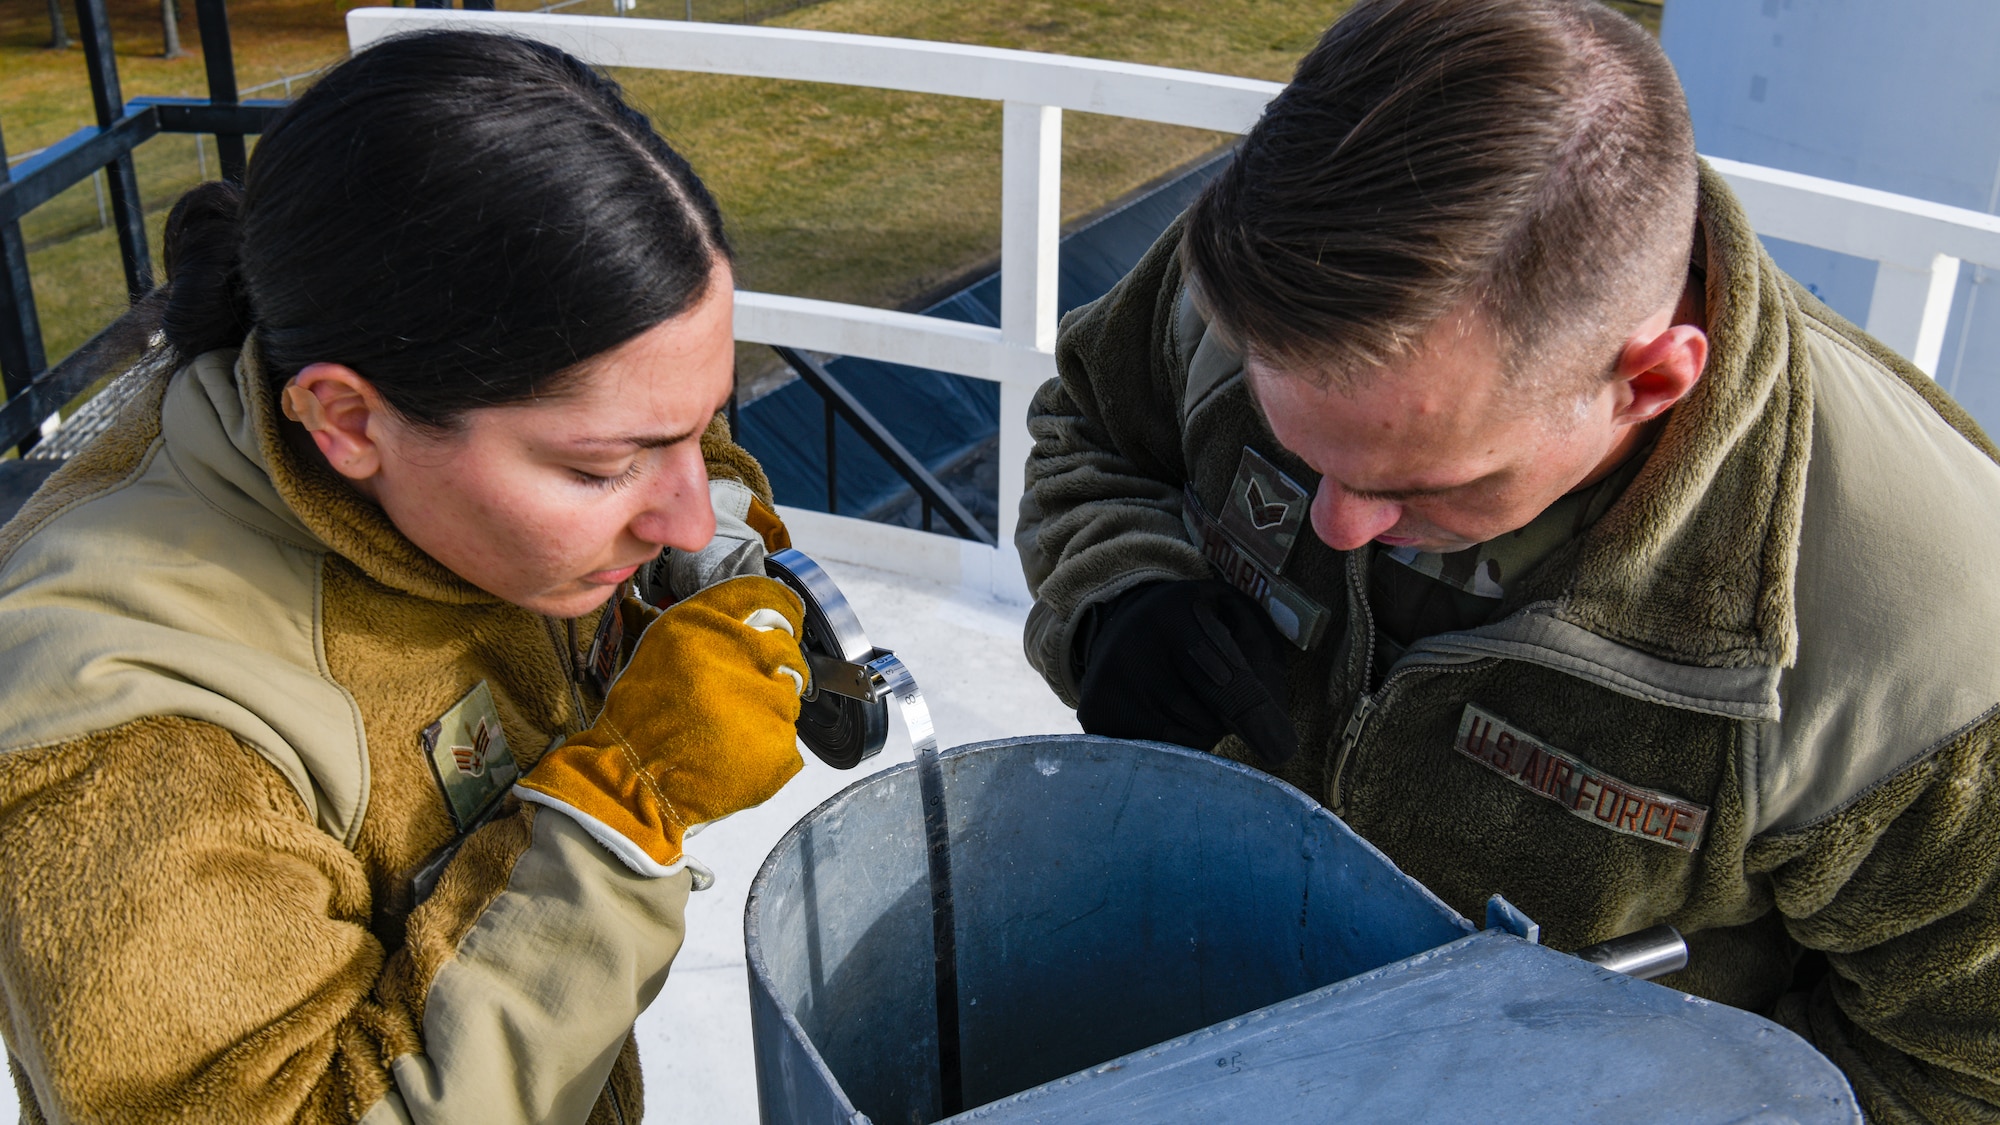 Senior Airman Victoria Russo and Senior Airman Brody Hoard, fuels specialists assigned to the 910th Logistics Readiness Squadron, measure the fluid level in one of the 910th Airlift Wing’s fuel tanks, Jan. 8, 2023, at Youngstown Air Reserve Station, Ohio.